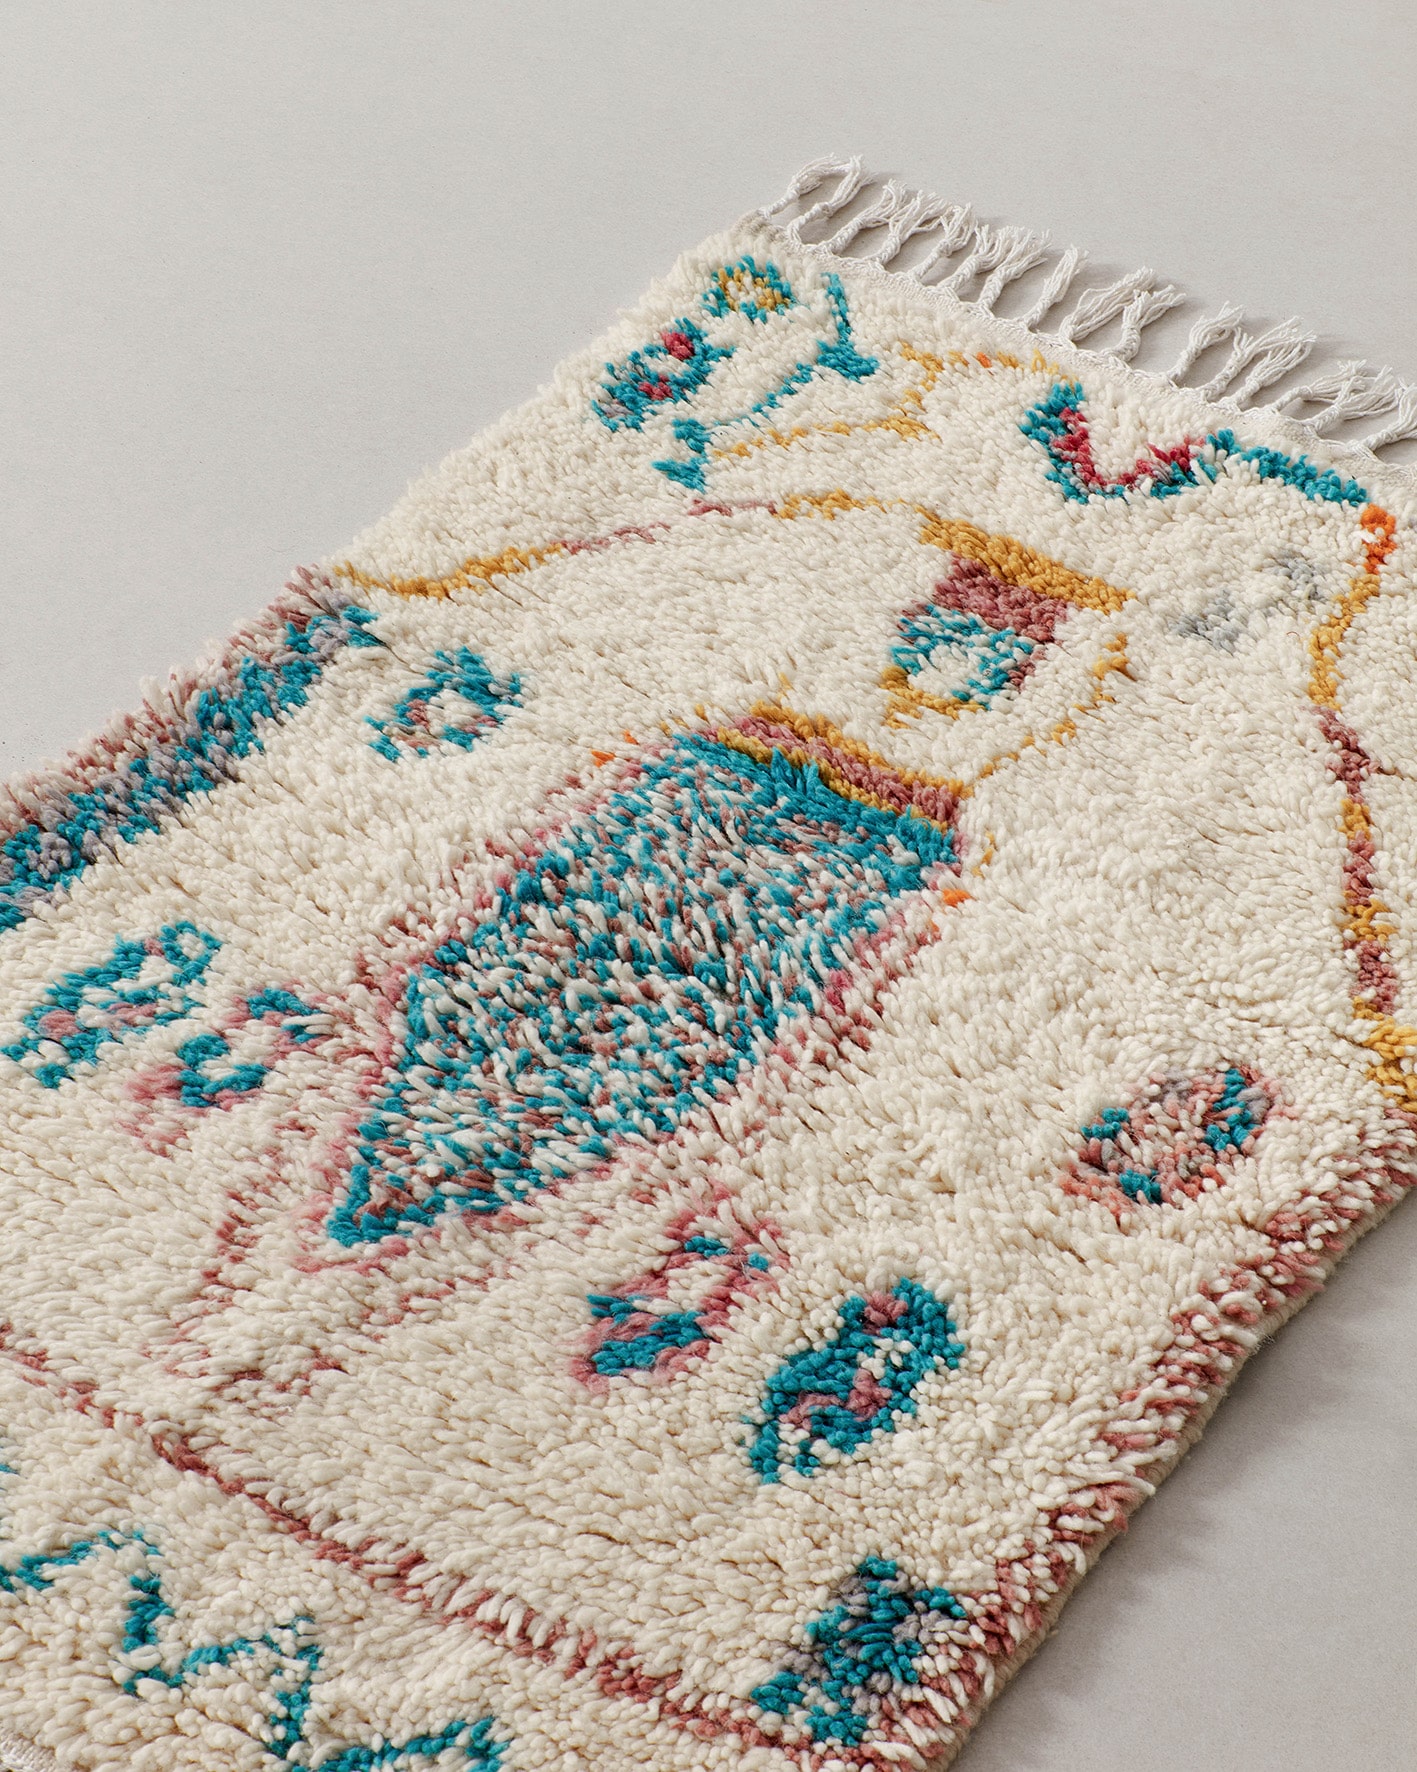 Tiny rug with turquoise motifs, close